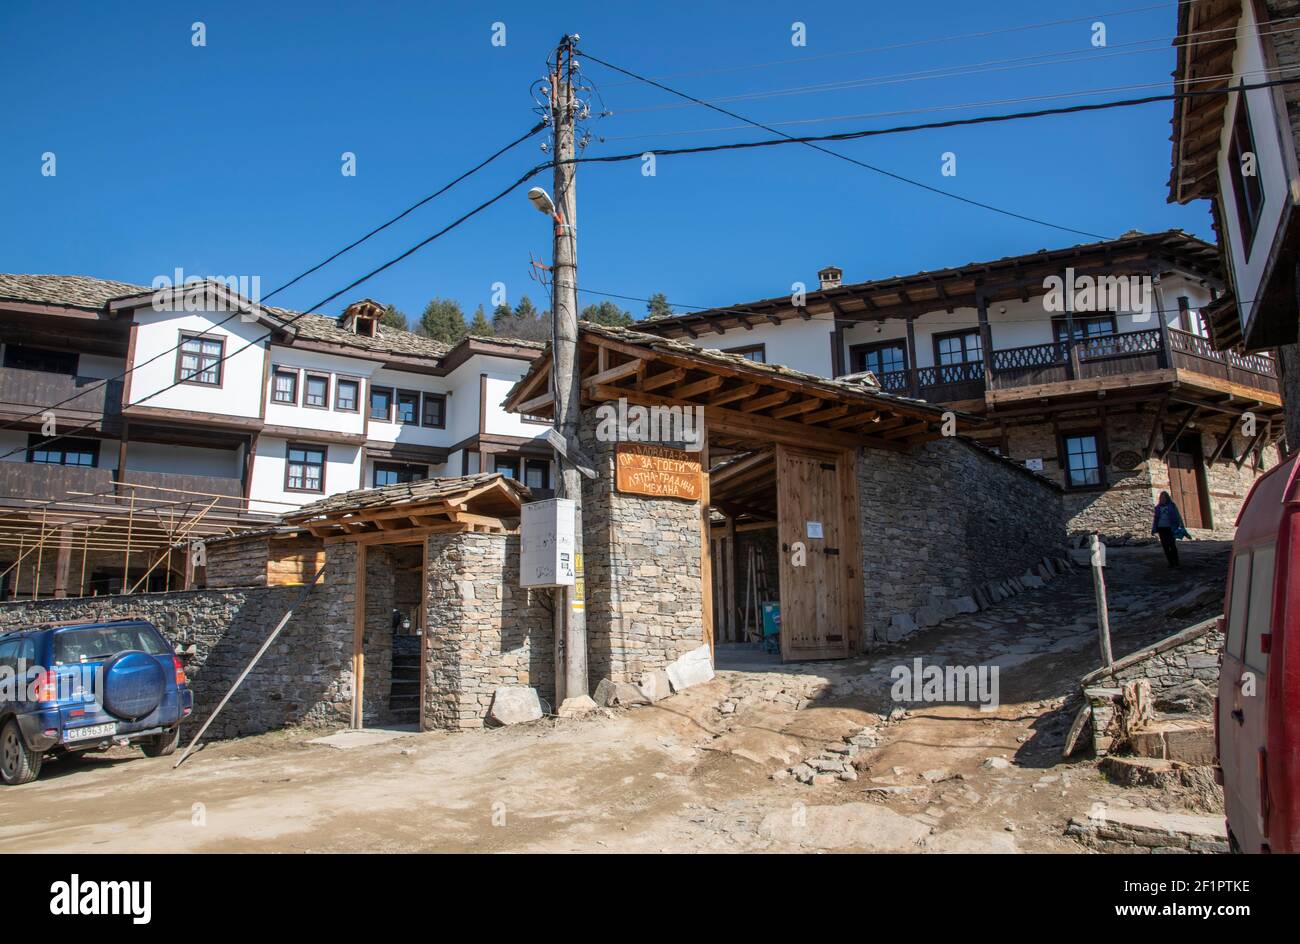 Kovachevitsa, Bulgaria - Feb 28 2021: Overviews of an authentic guesthouse in Kovachevitsa in the early spring expecting tourists Stock Photo